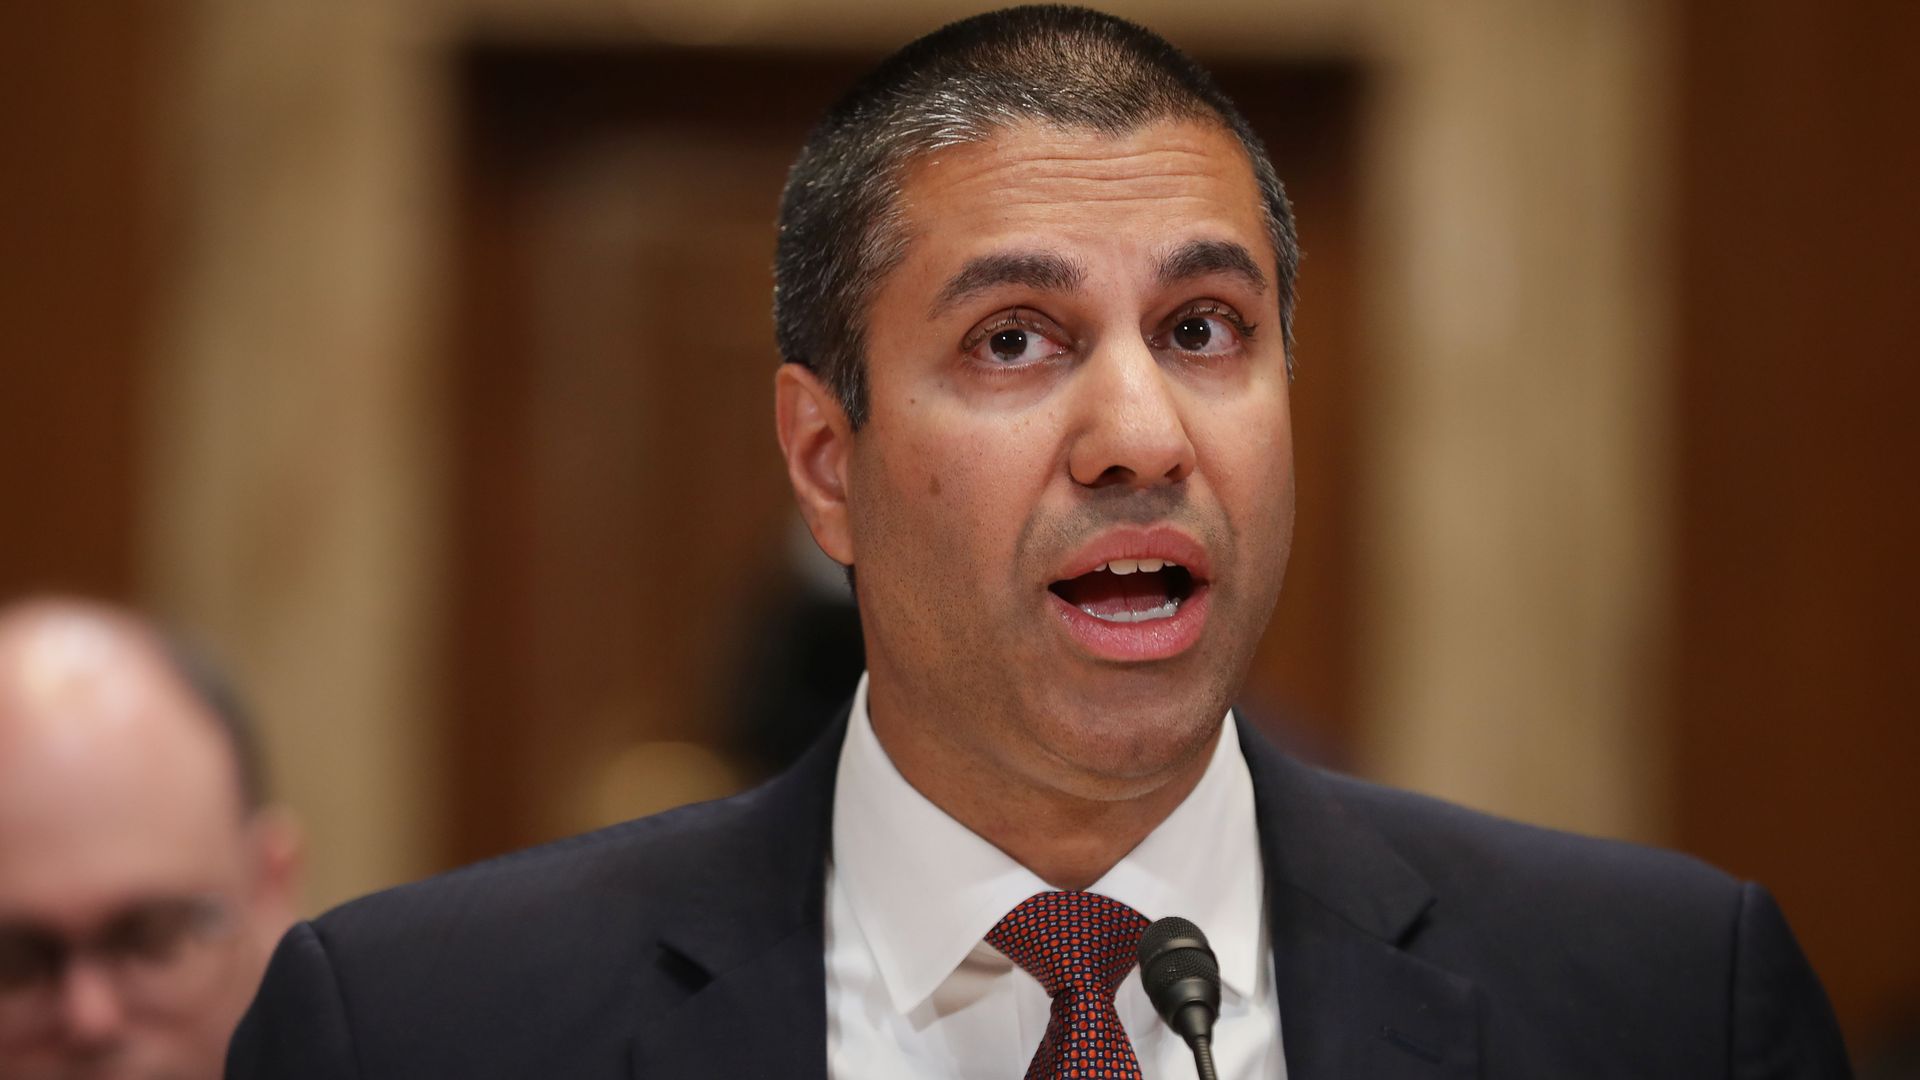 A photo of FCC Chairman Ajit Pai speaking into a microphone.